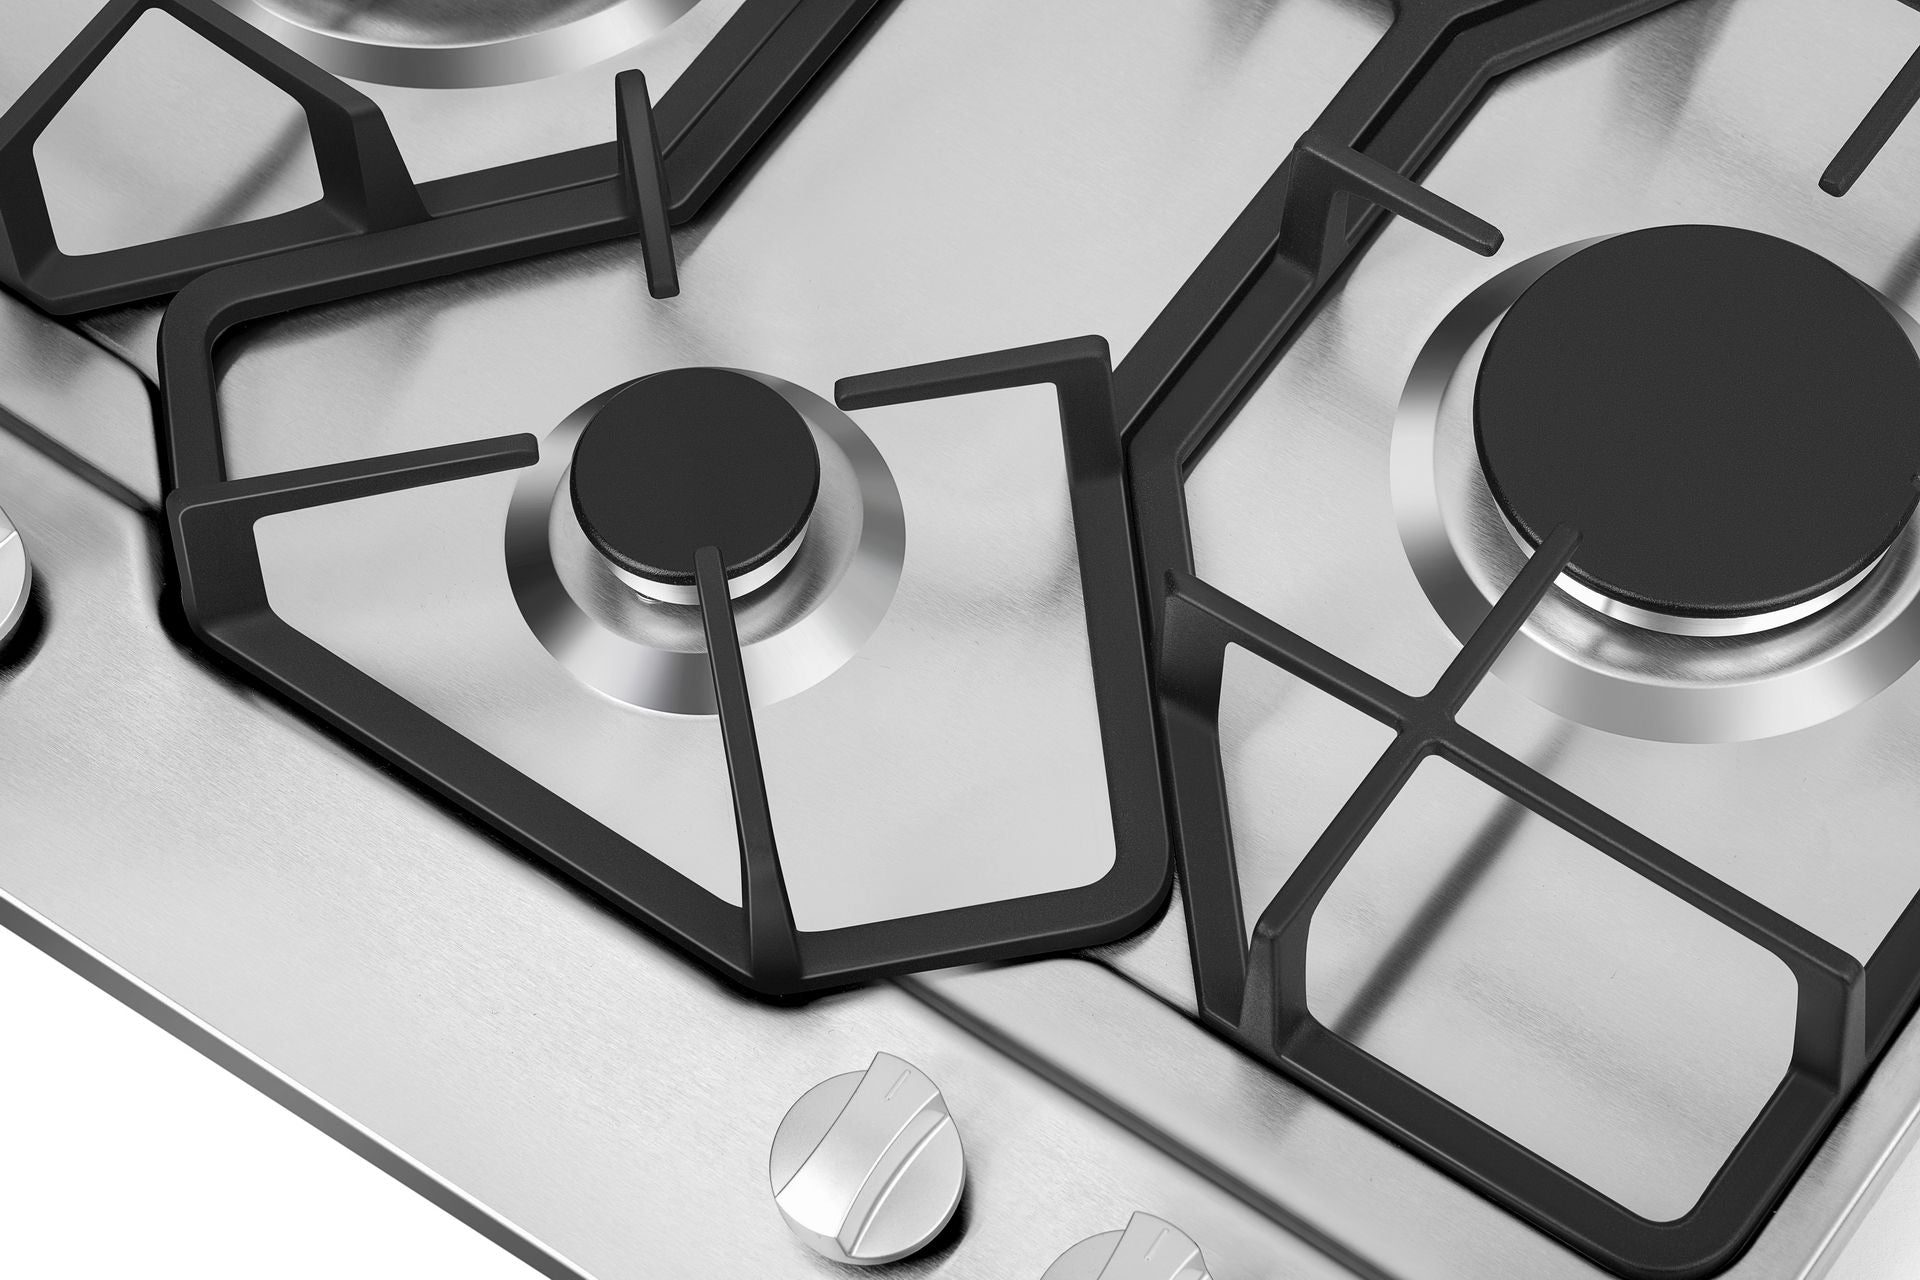 22″x20″ Built in Gas Cooktop 4 Burners Stainless Steel Stove NG/LPG Gas Hob  US